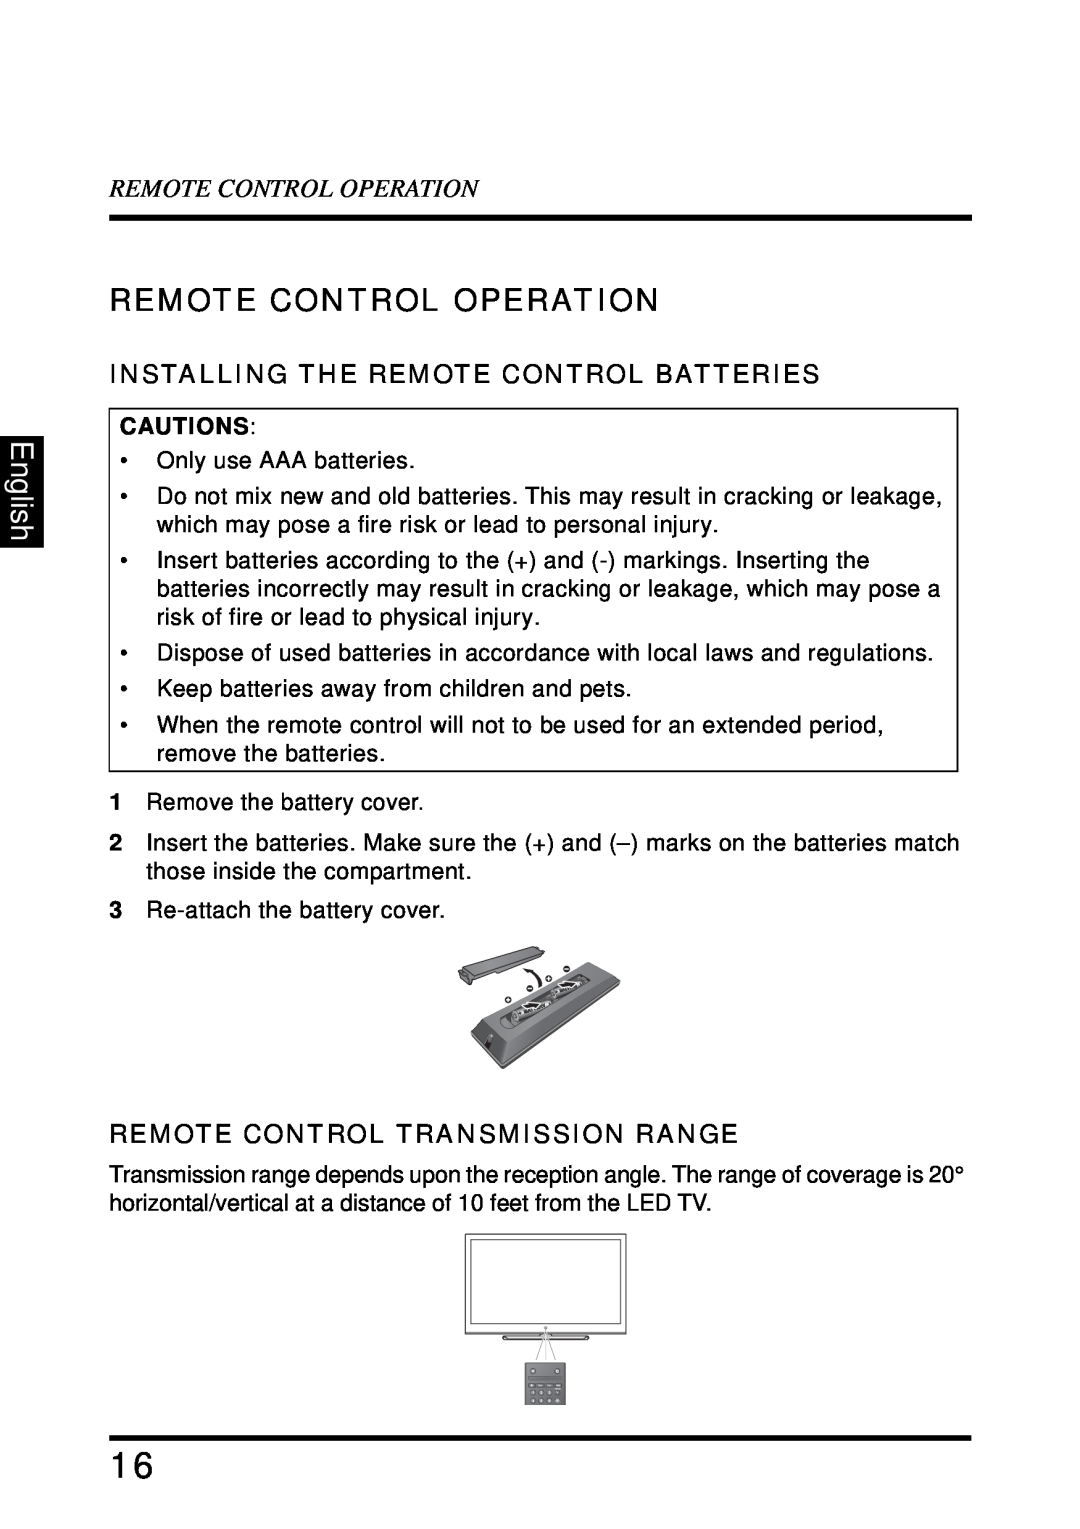 Westinghouse LD-4680 user manual Remote Control Operation, English, Installing The Remote Control Batteries 